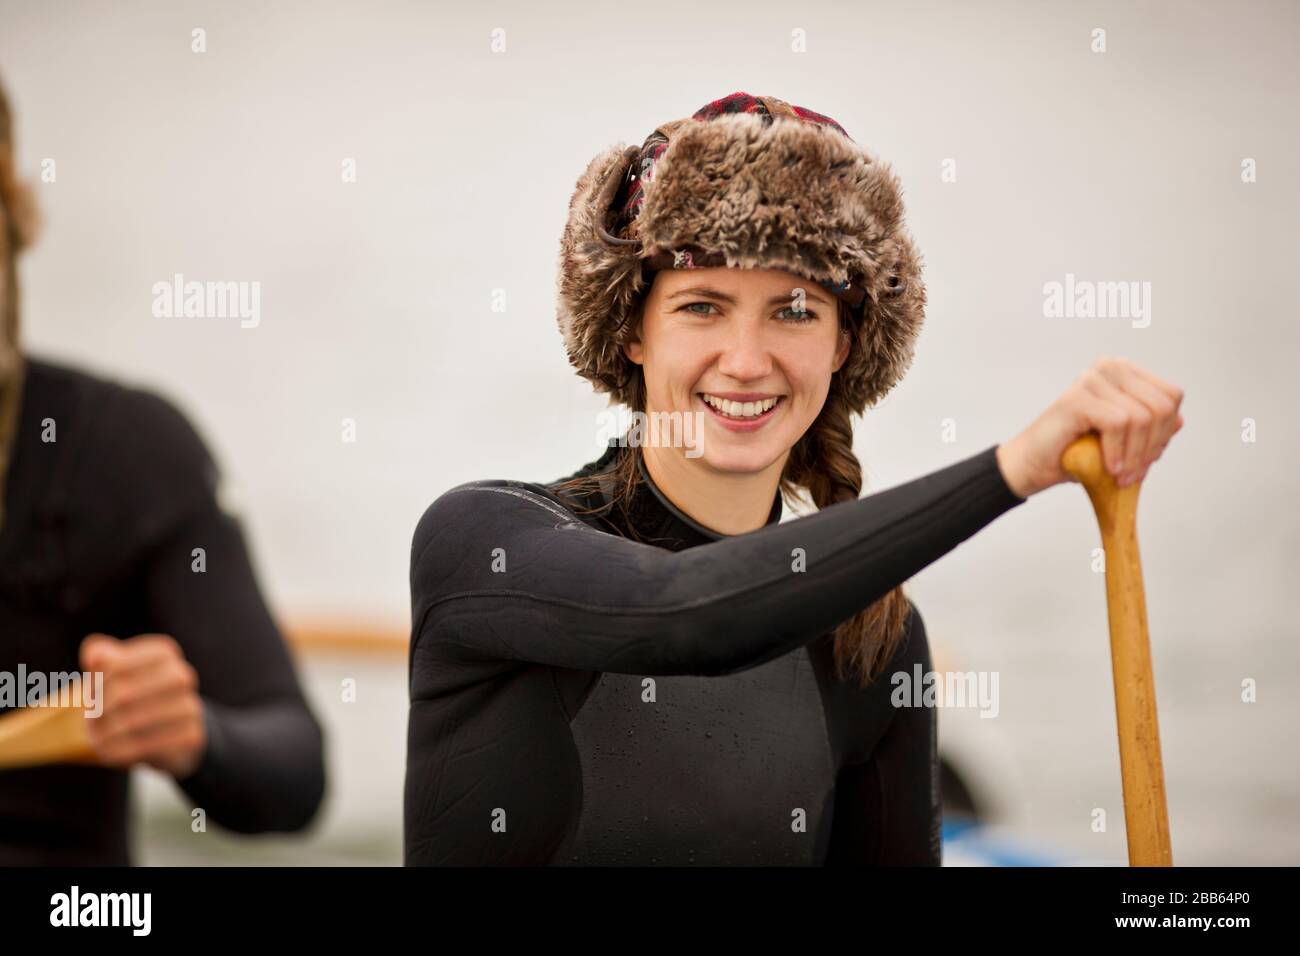 Portrait of a young woman wearing a fur hat and wetsuit while paddling in canoe with friends. Stock Photo